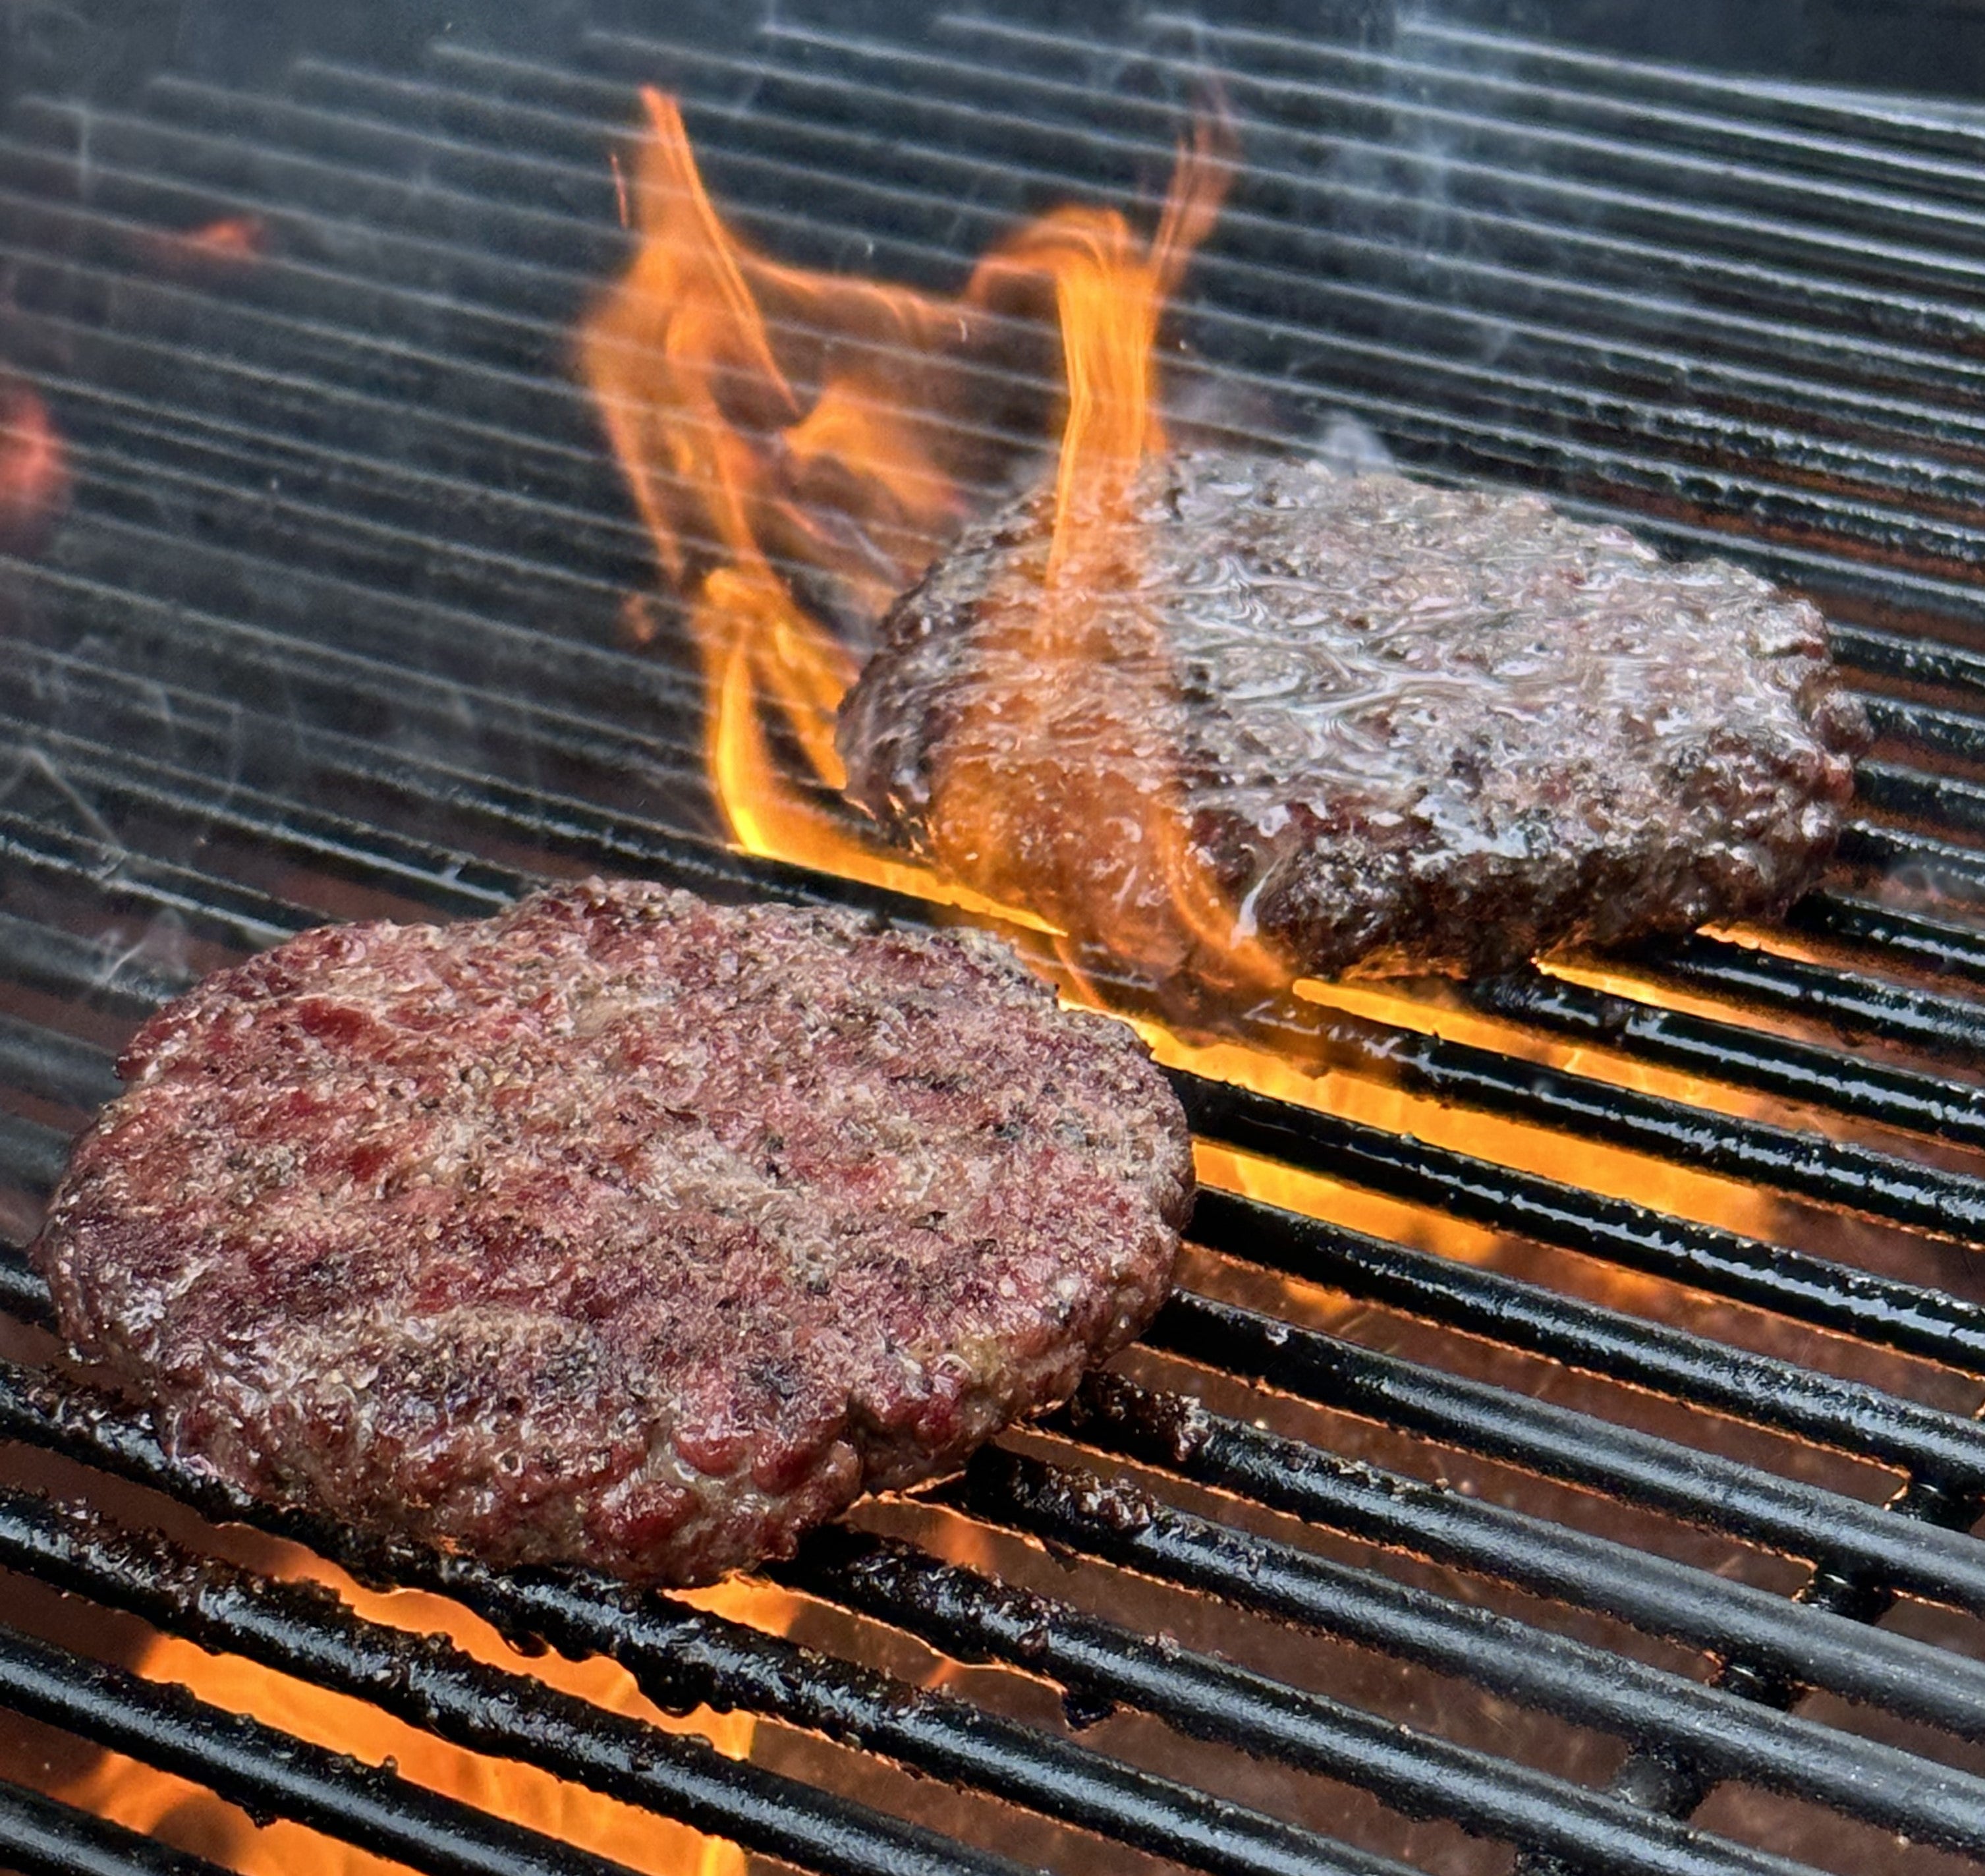 How to Grill Hamburgers